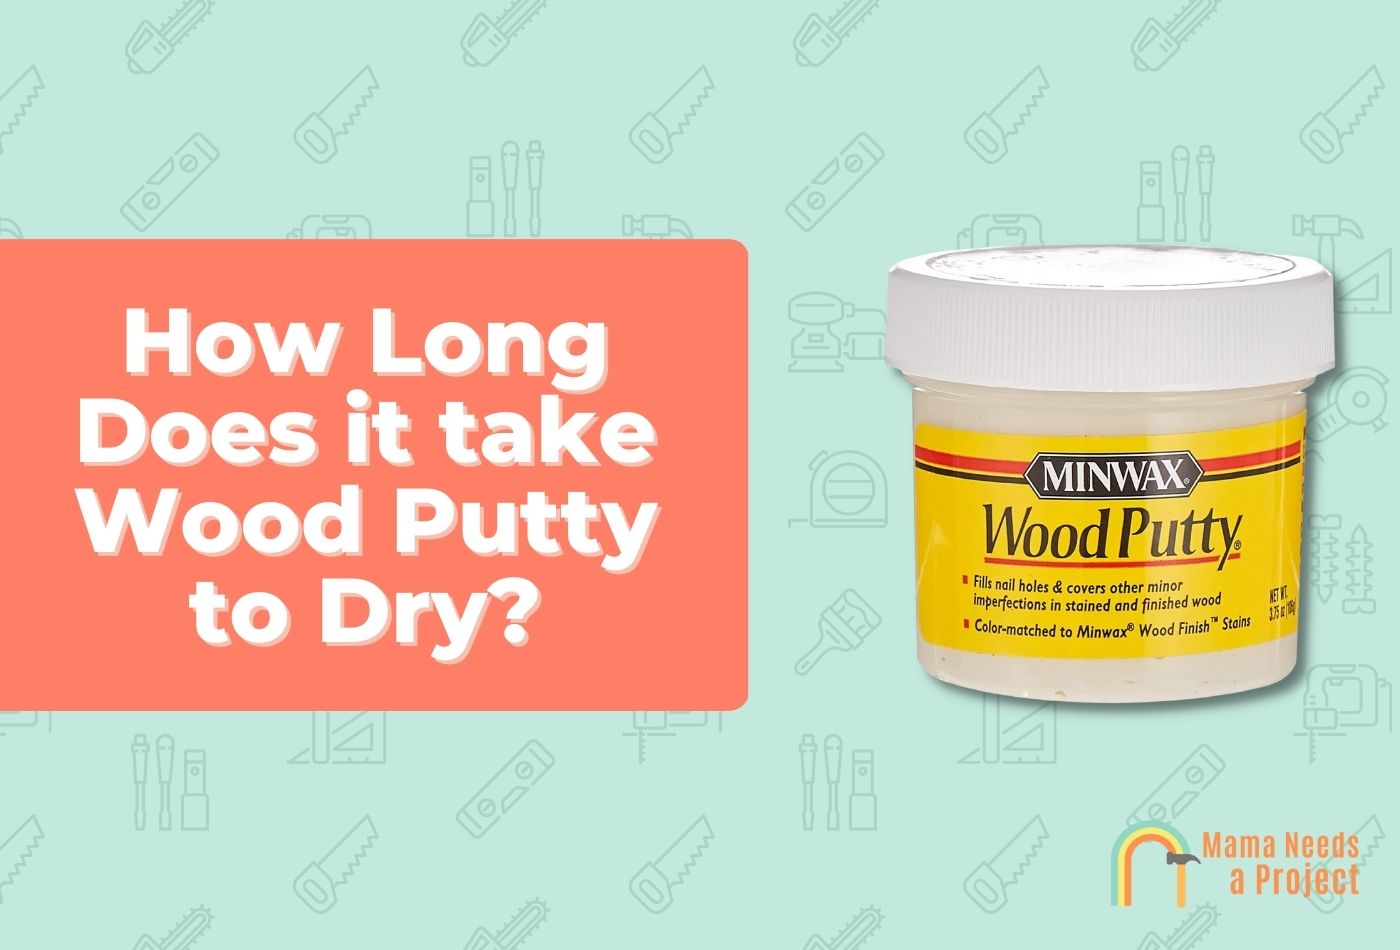 How Long Does it take Wood Putty to Dry